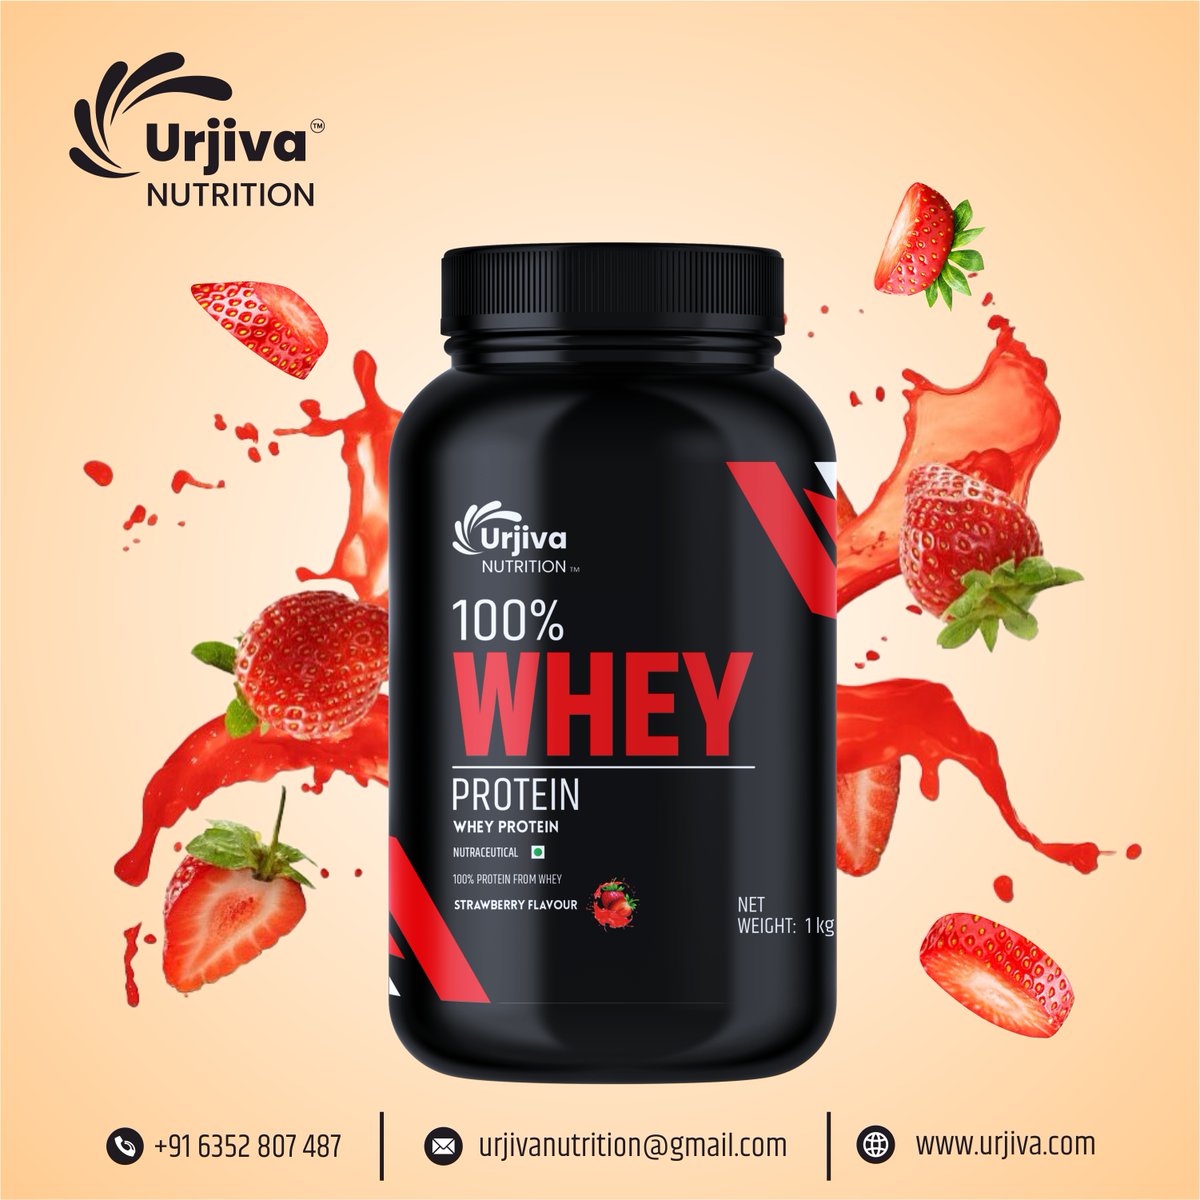 100% Whey Protein Whey Protein (Strawberry Flavour)
Satisfy your taste buds and fuel your muscles with our Strawberry Flavored 100% Whey Protein.
.
To place the order online, please visit us at:
urjiva.com
Mobile Number: +91-6352807487
.
#ProteinPowder #MuscleGainer